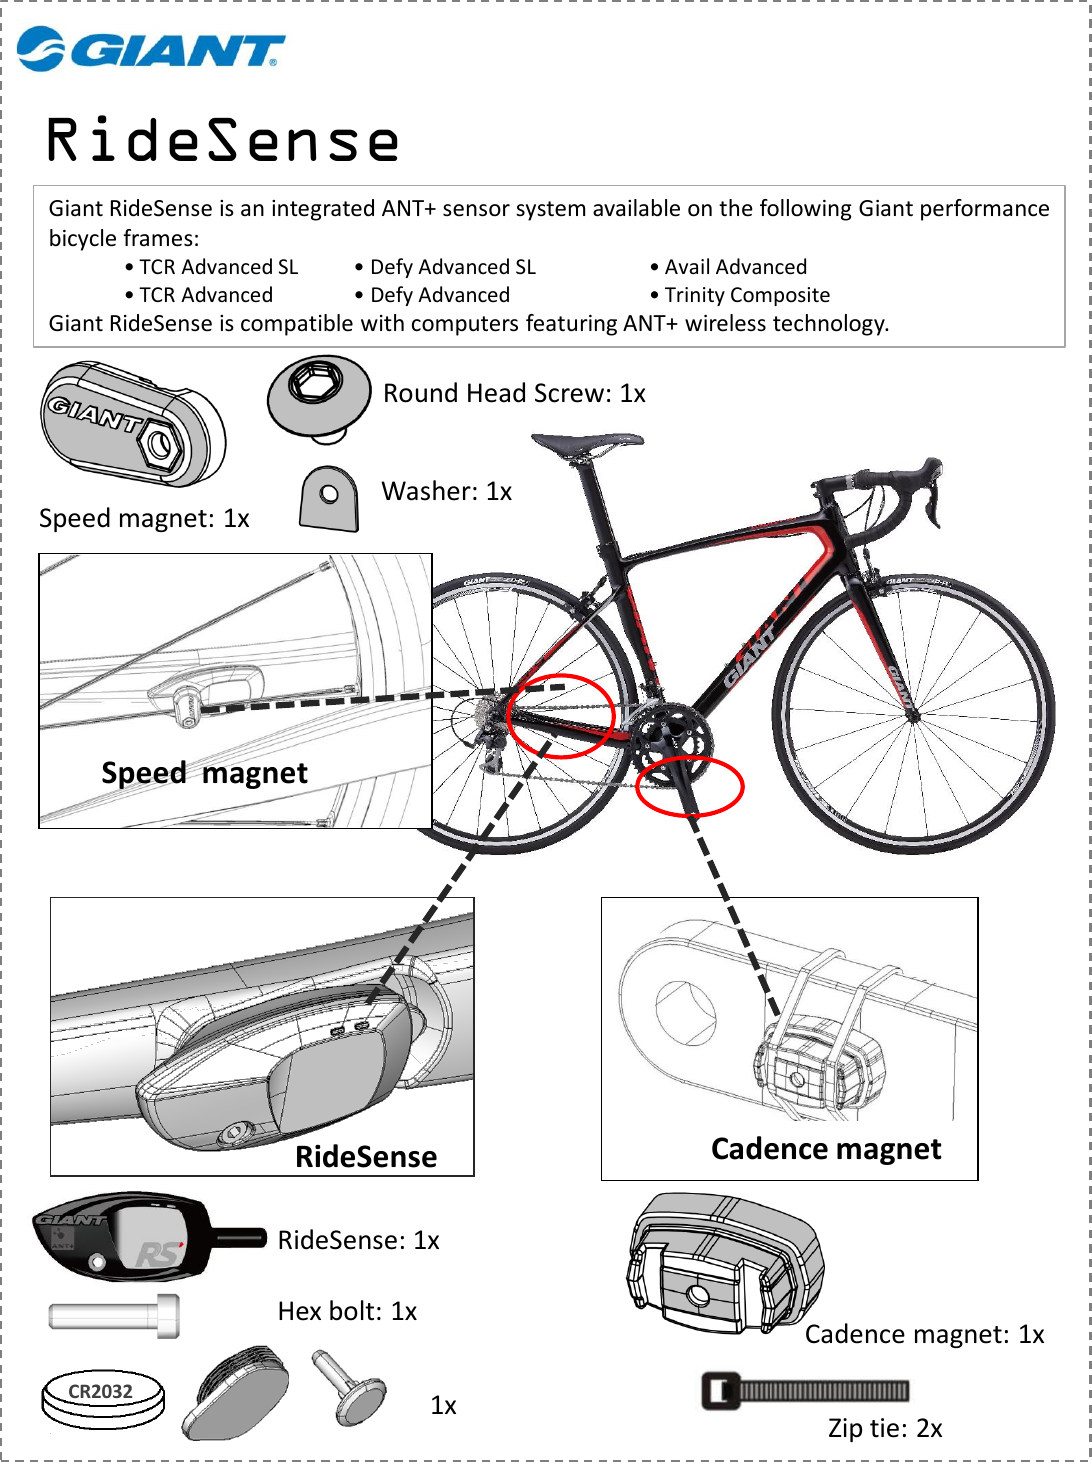 RideSenseRideSenseSpeed  magnetCadence magnetHex bolt: 1xRideSense: 1xSpeed magnet: 1xRound Head Screw: 1xWasher: 1xCadence magnet: 1xZip tie: 2xCR2032 1xGiant RideSense is an integrated ANT+ sensor system available on the following Giant performance bicycle frames:• TCR Advanced SL • Defy Advanced SL • Avail Advanced• TCR Advanced • Defy Advanced • Trinity CompositeGiant RideSense is compatible with computers featuring ANT+ wireless technology.